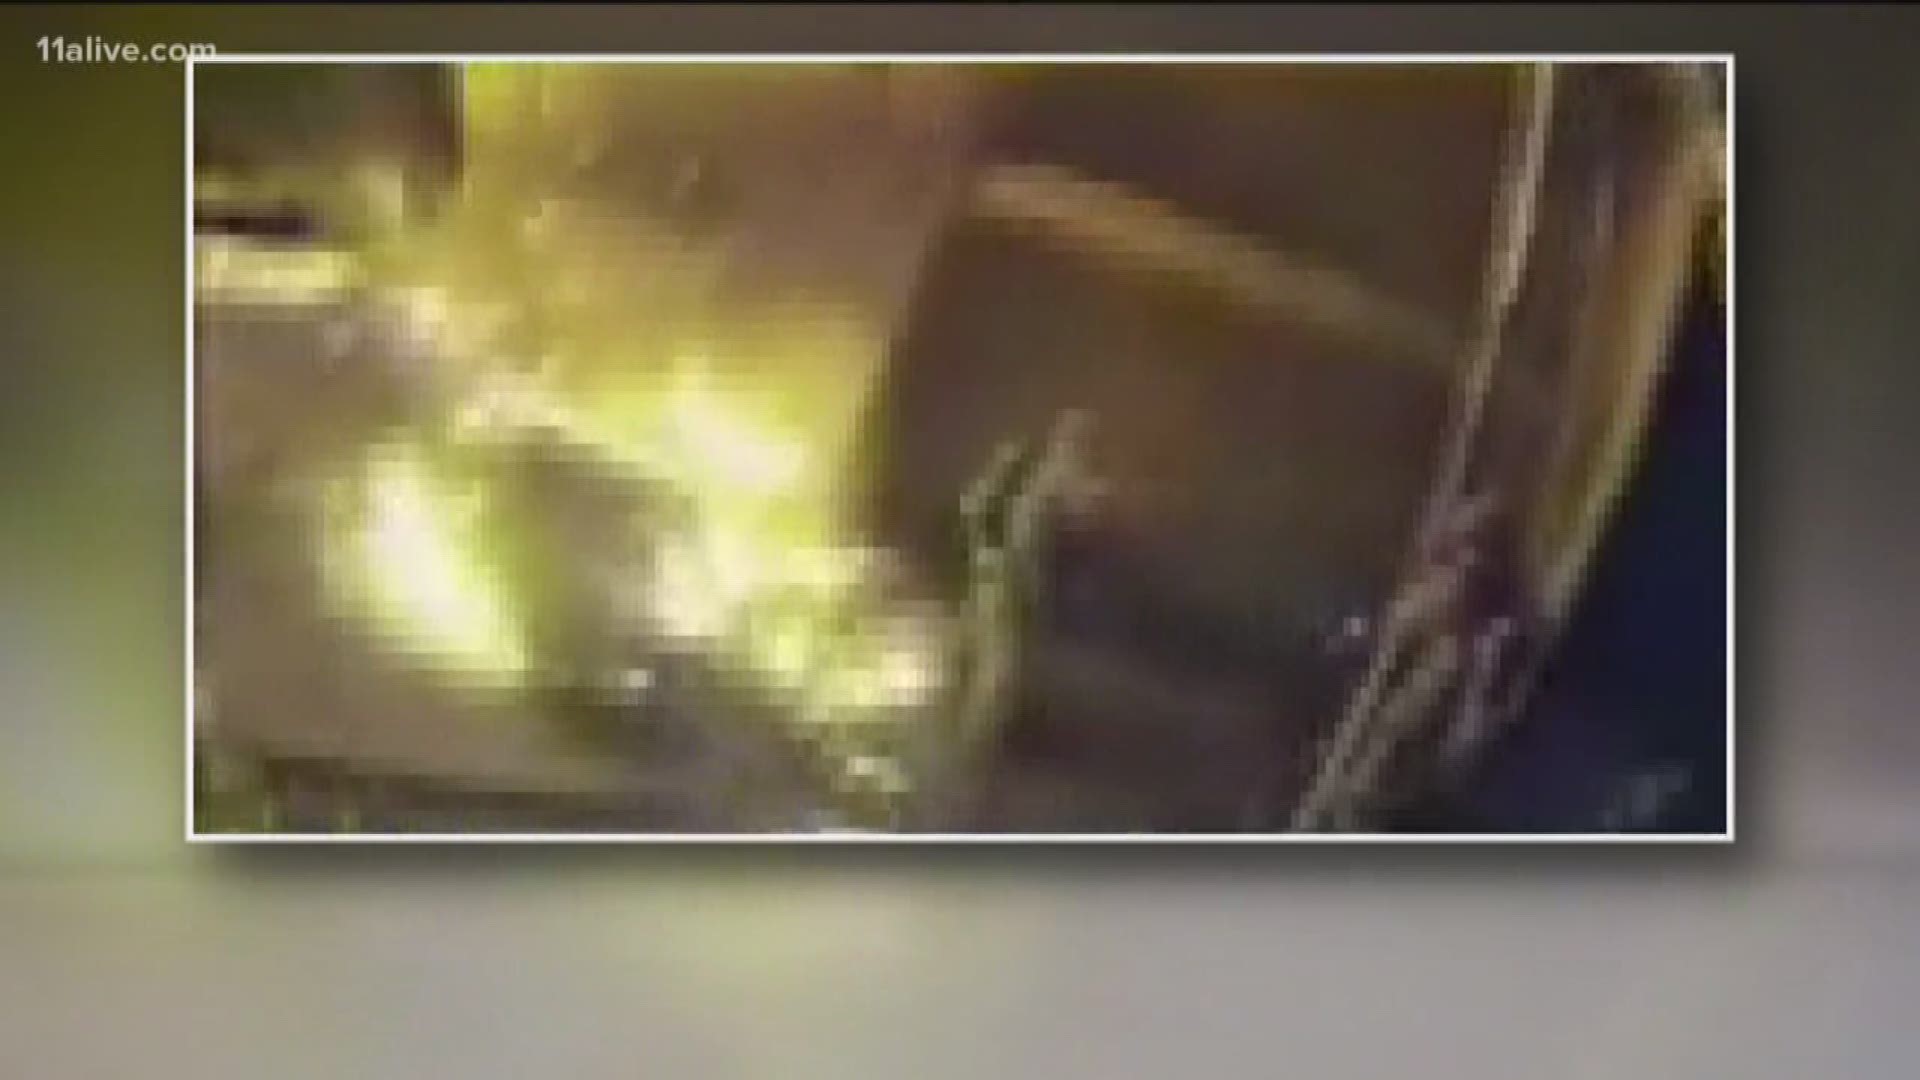 DeKalb Fire Department released video showing a firefighter catching a child being thrown from a window during an apartment fire on January 3.